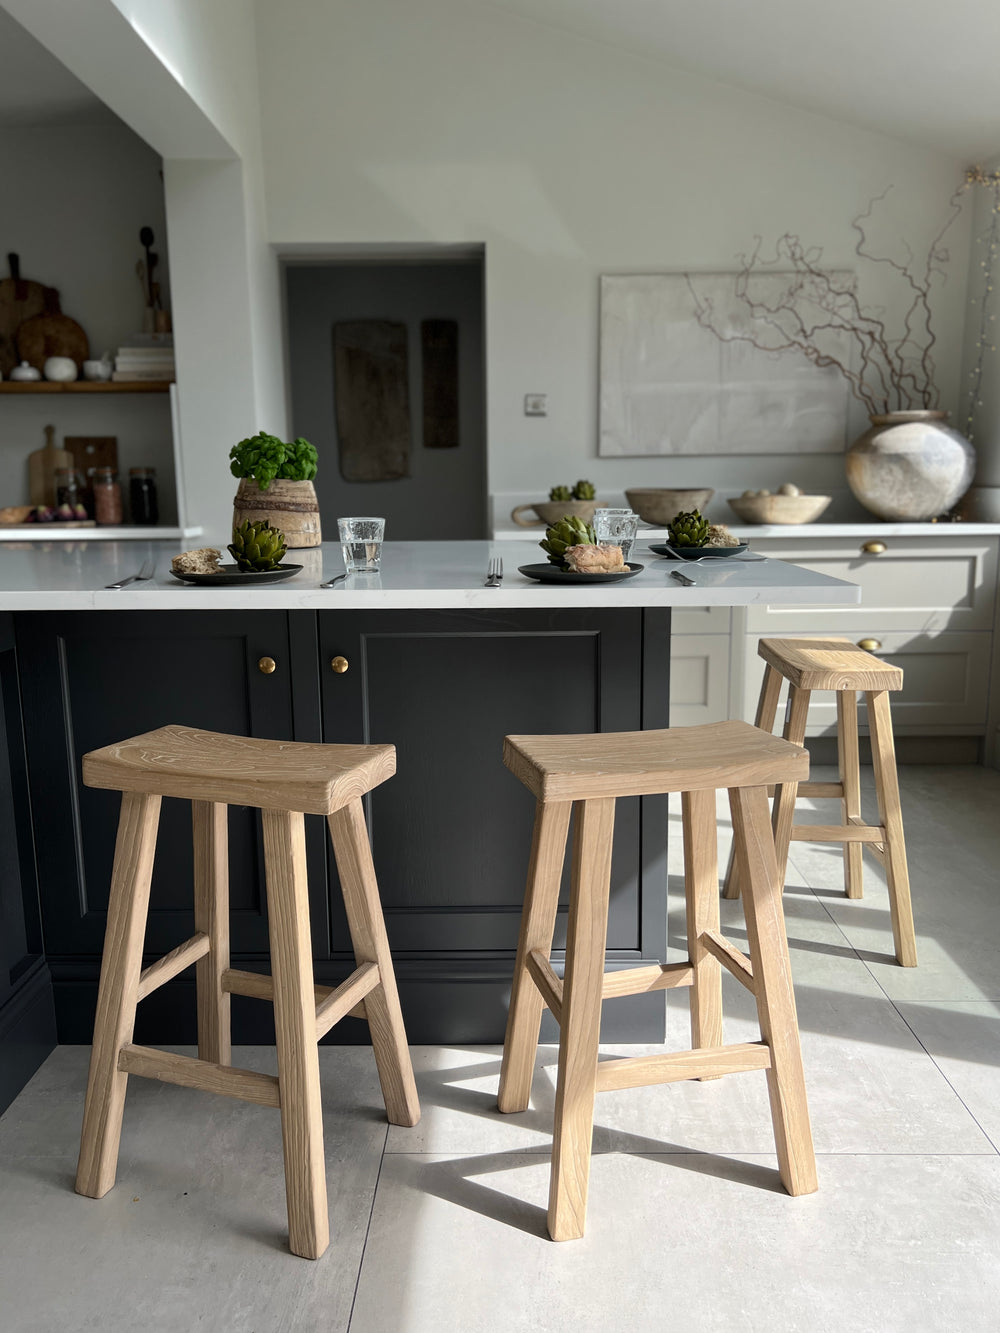 Rustic Reclaimed Wood Bar Stool in a tradtiional painted kitchen